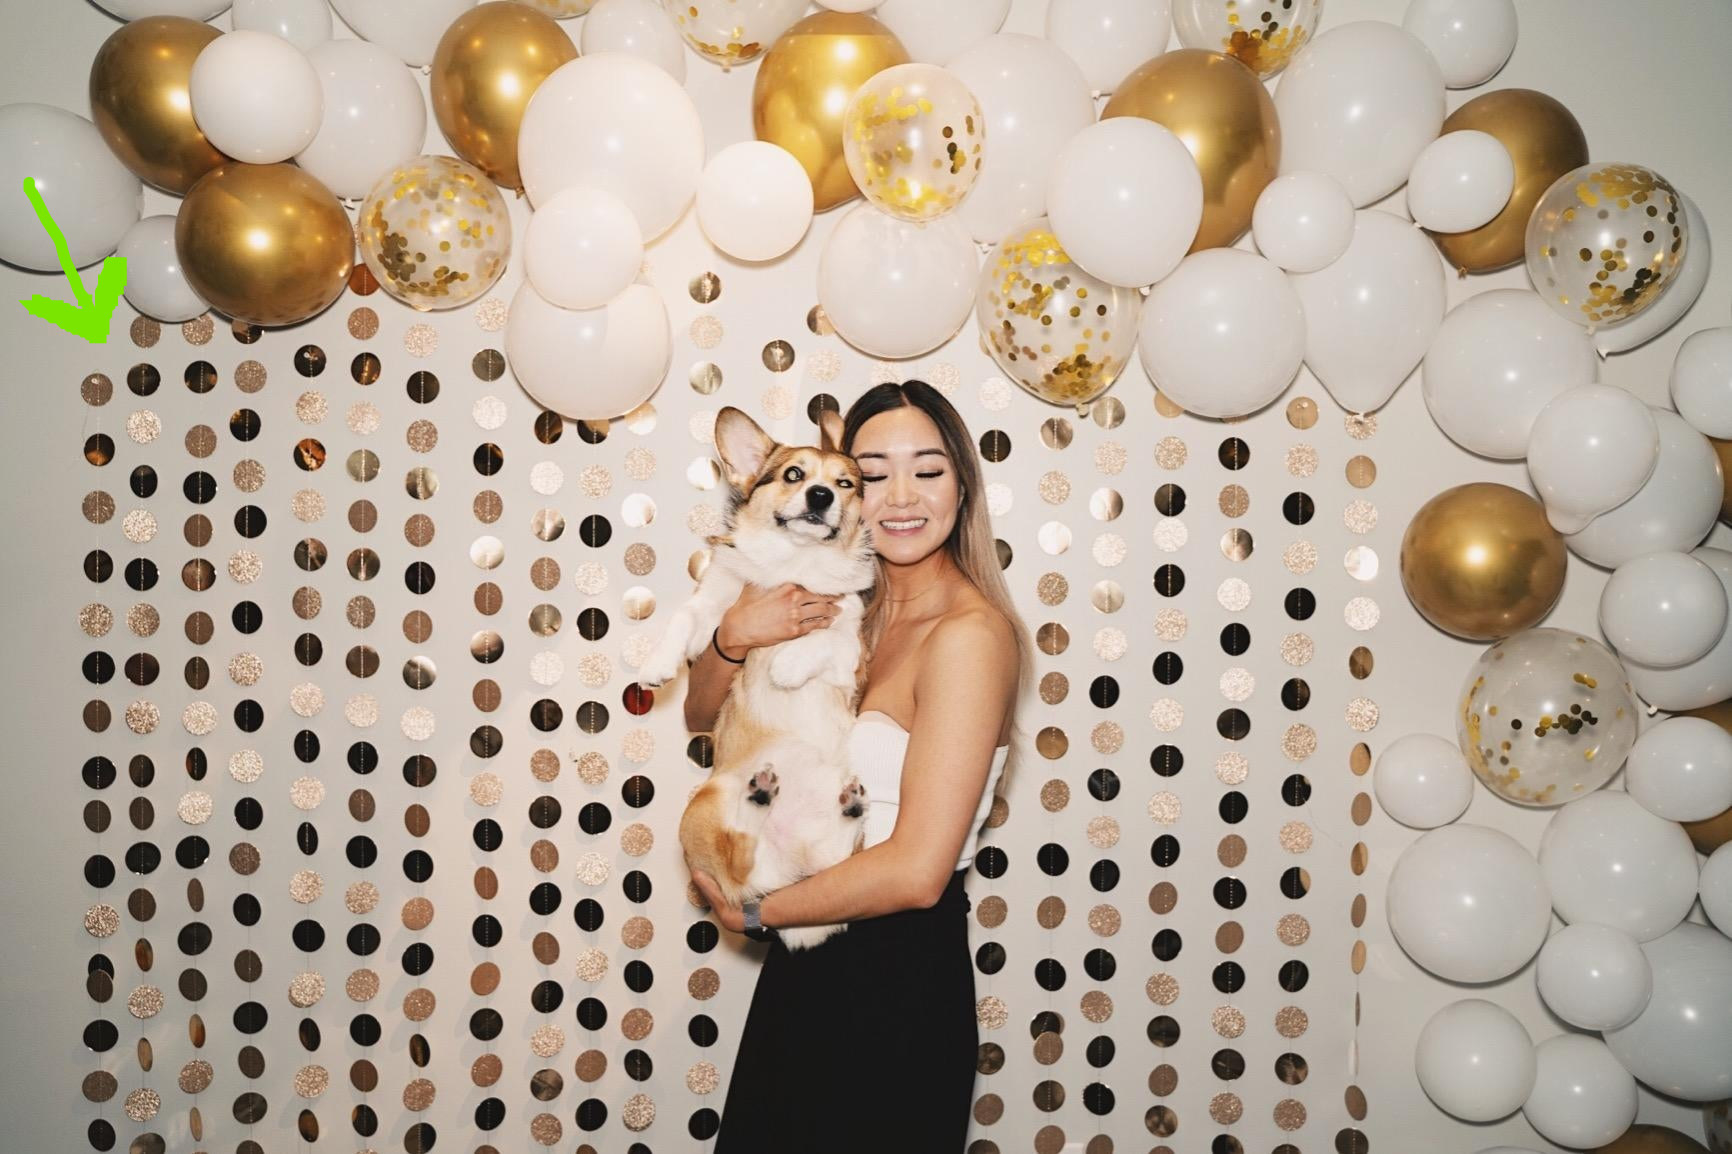 Reviewer posing with dog in front of circle gold and glittery streamers on wall with white and gold balloon streamer